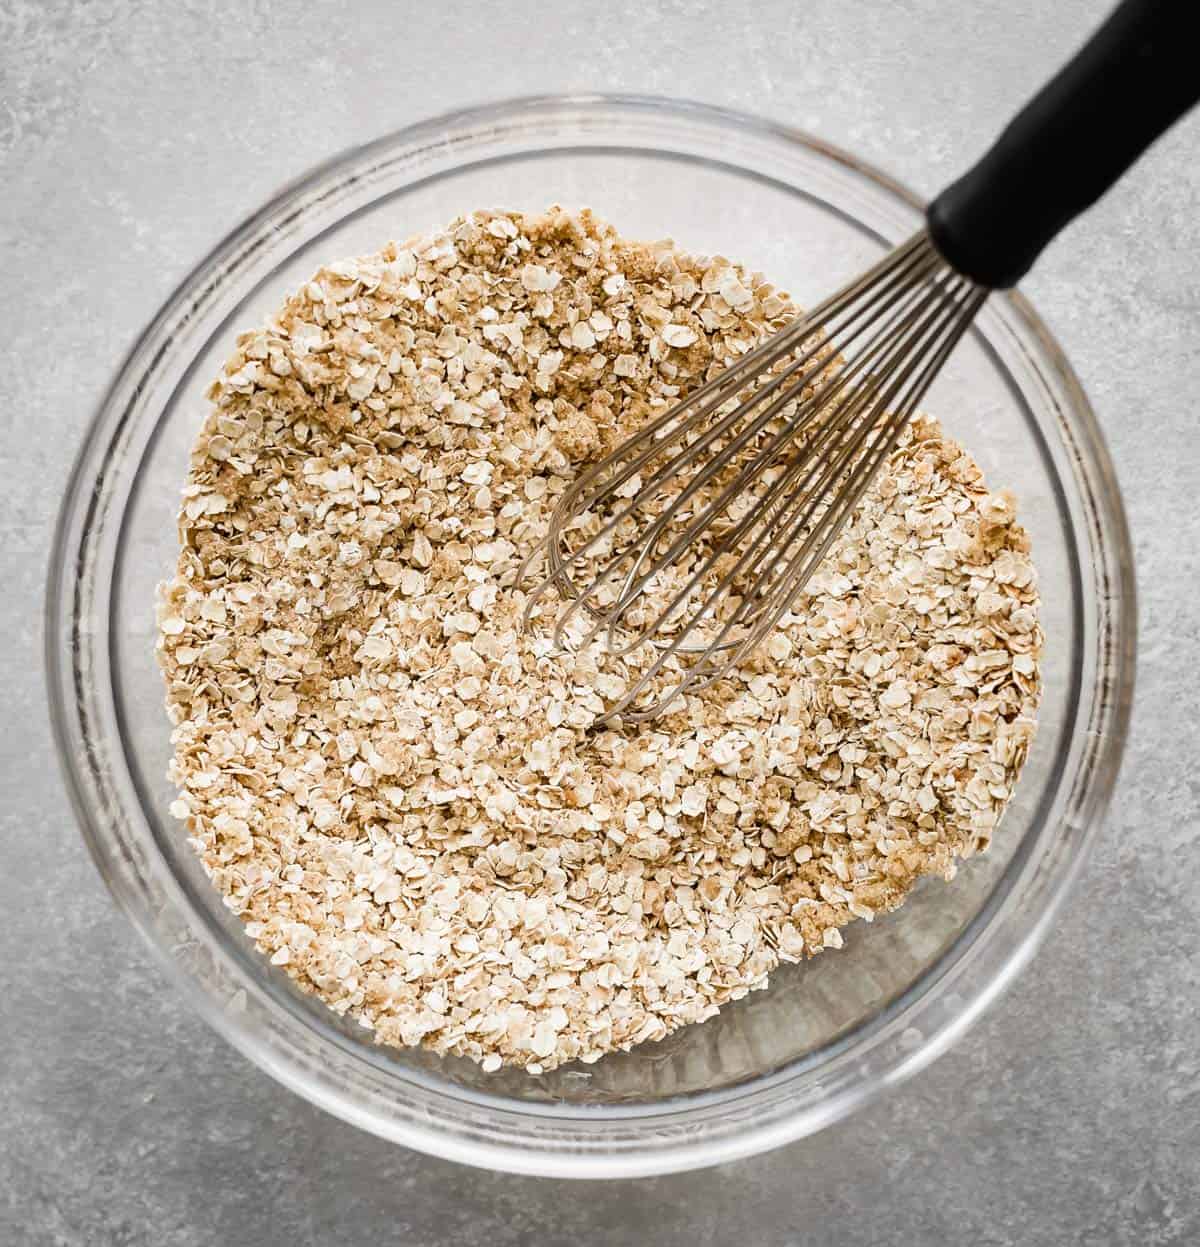 A whisk stirring quick oats in a glass bowl.